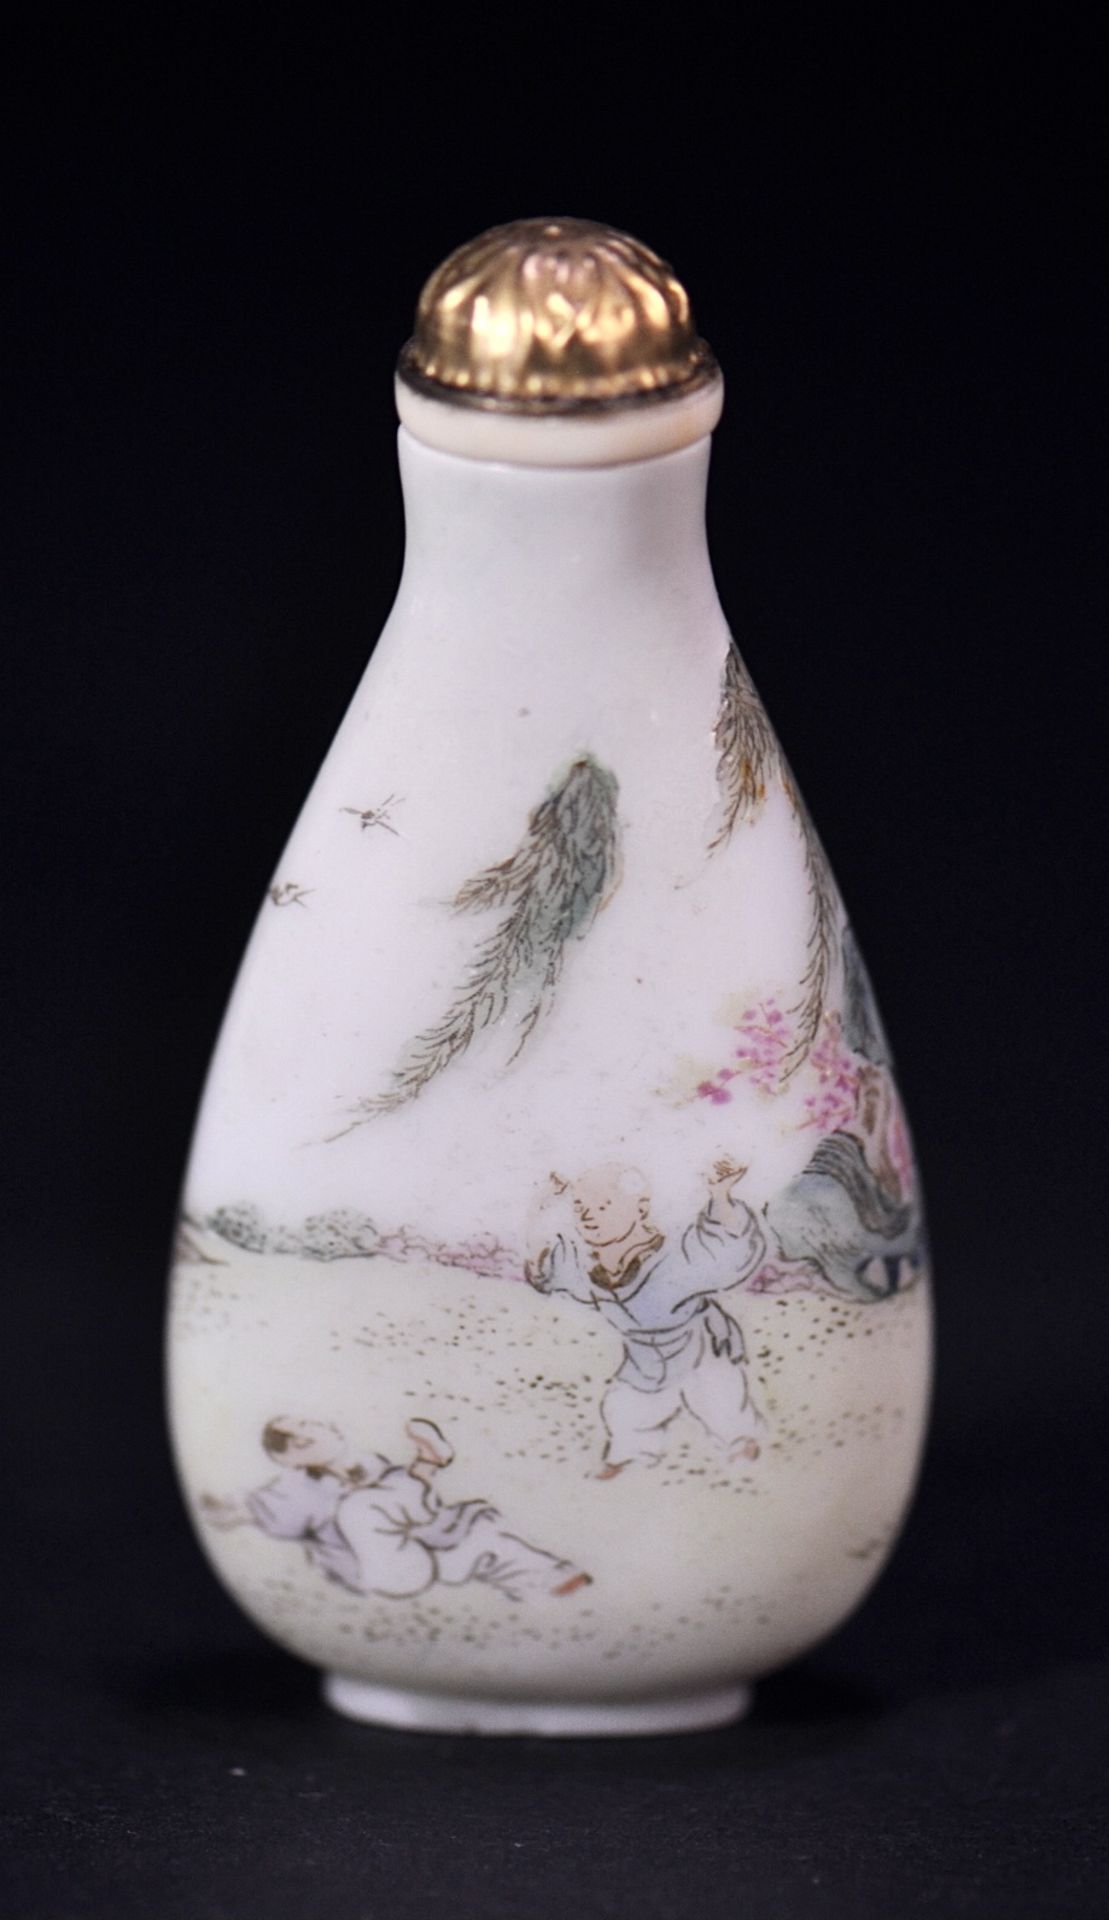 Qing dynasty 18th century white Peking glass snuff bottle - Image 2 of 3